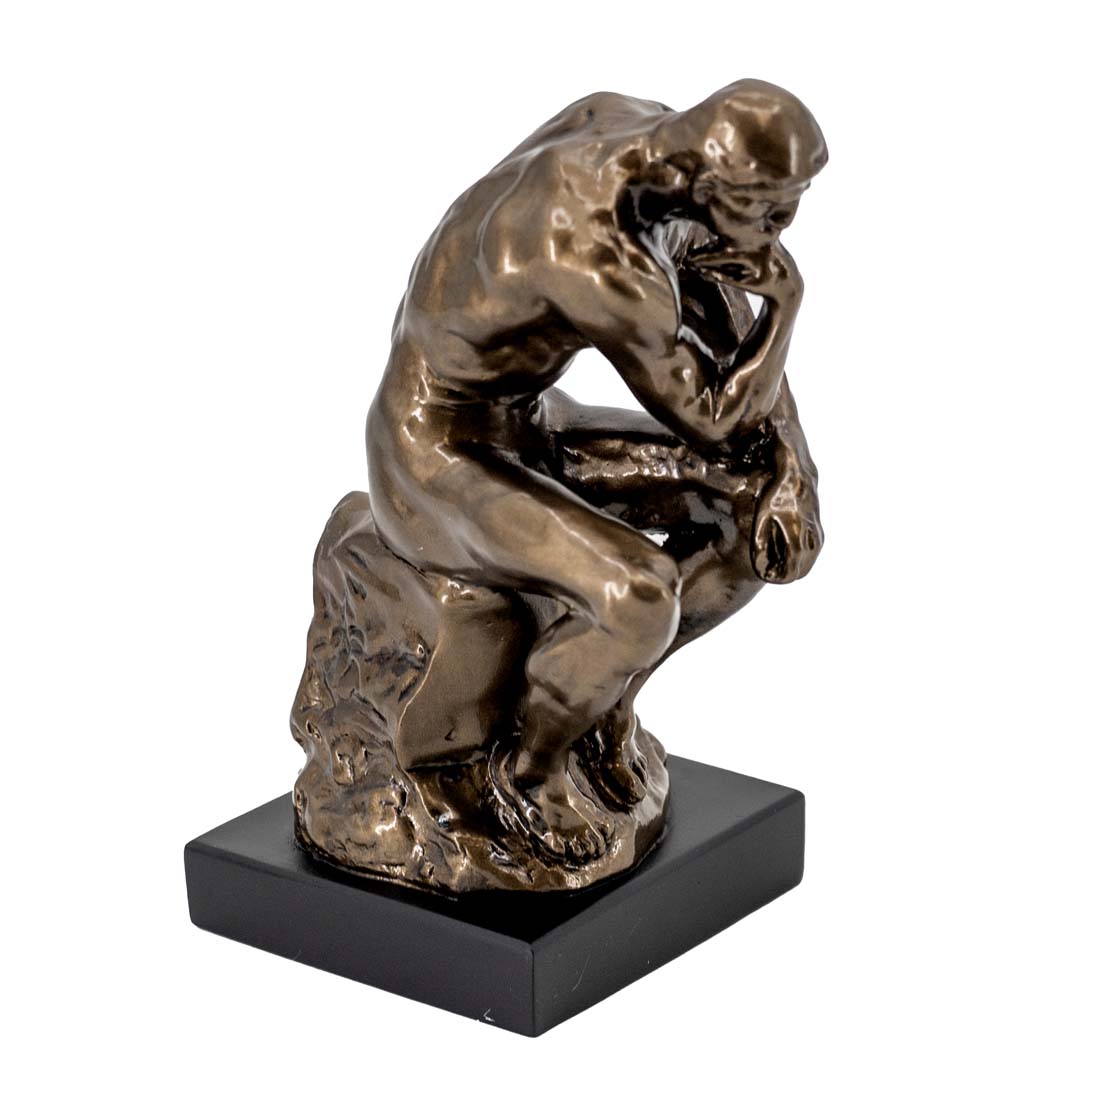 Small Rodin The Thinker Sculpture Reproduction